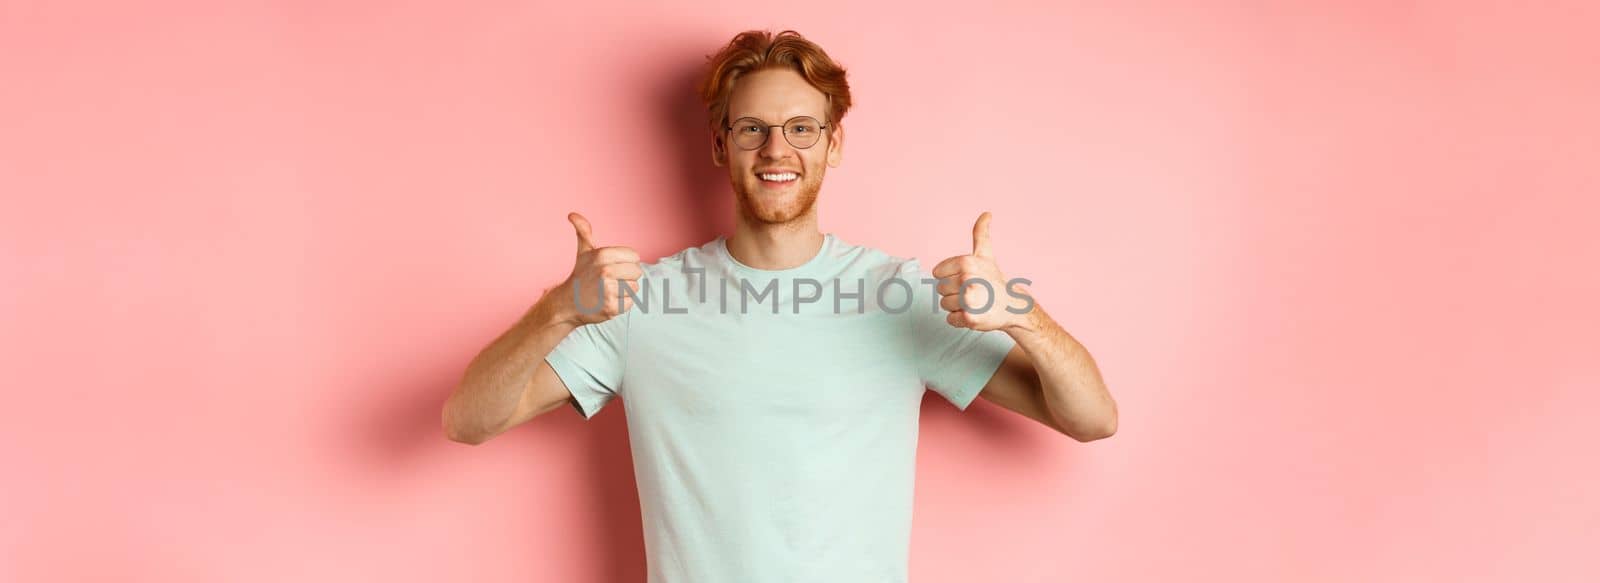 Cheerful european man with red hair and beard, wearing glasses, showing thumbs-up and smiling in approval, praise something good, standing over pink background.